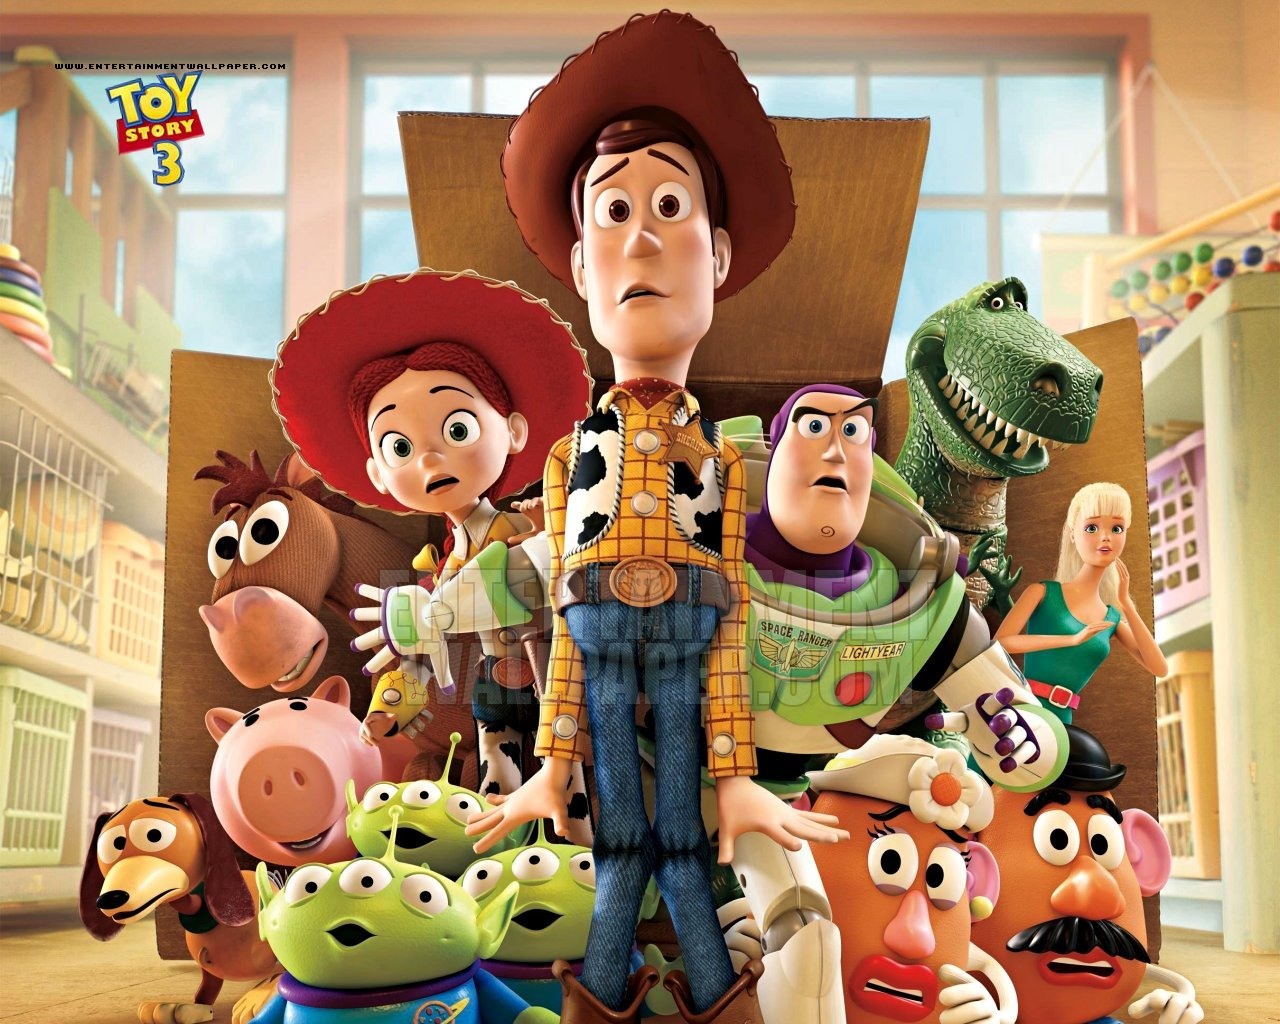 original toy story 3 wallpapers